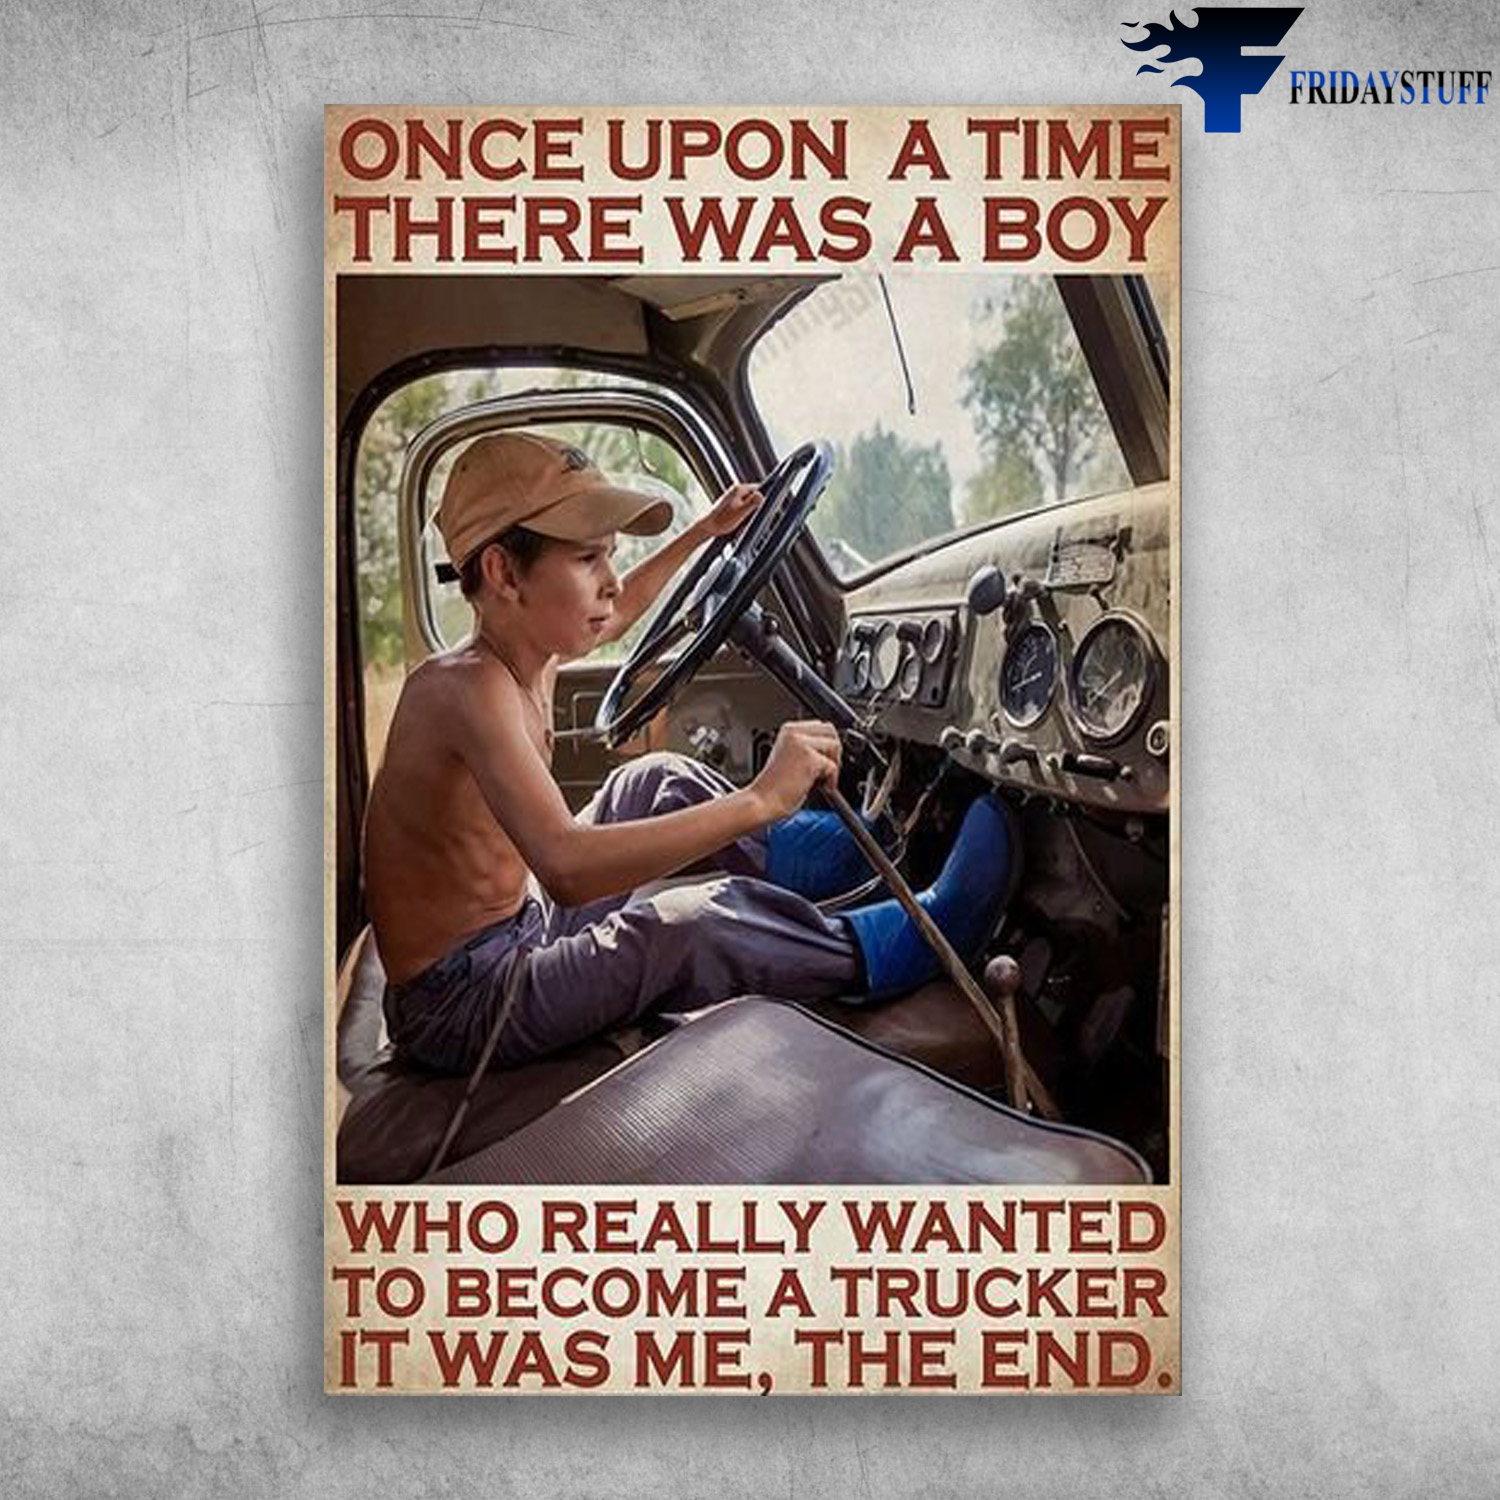 Boy Wants To Become A Trucker - Once Upon A Time, There Was A Boy Who Really Wanted To Become A Trucker, It To Me, The End